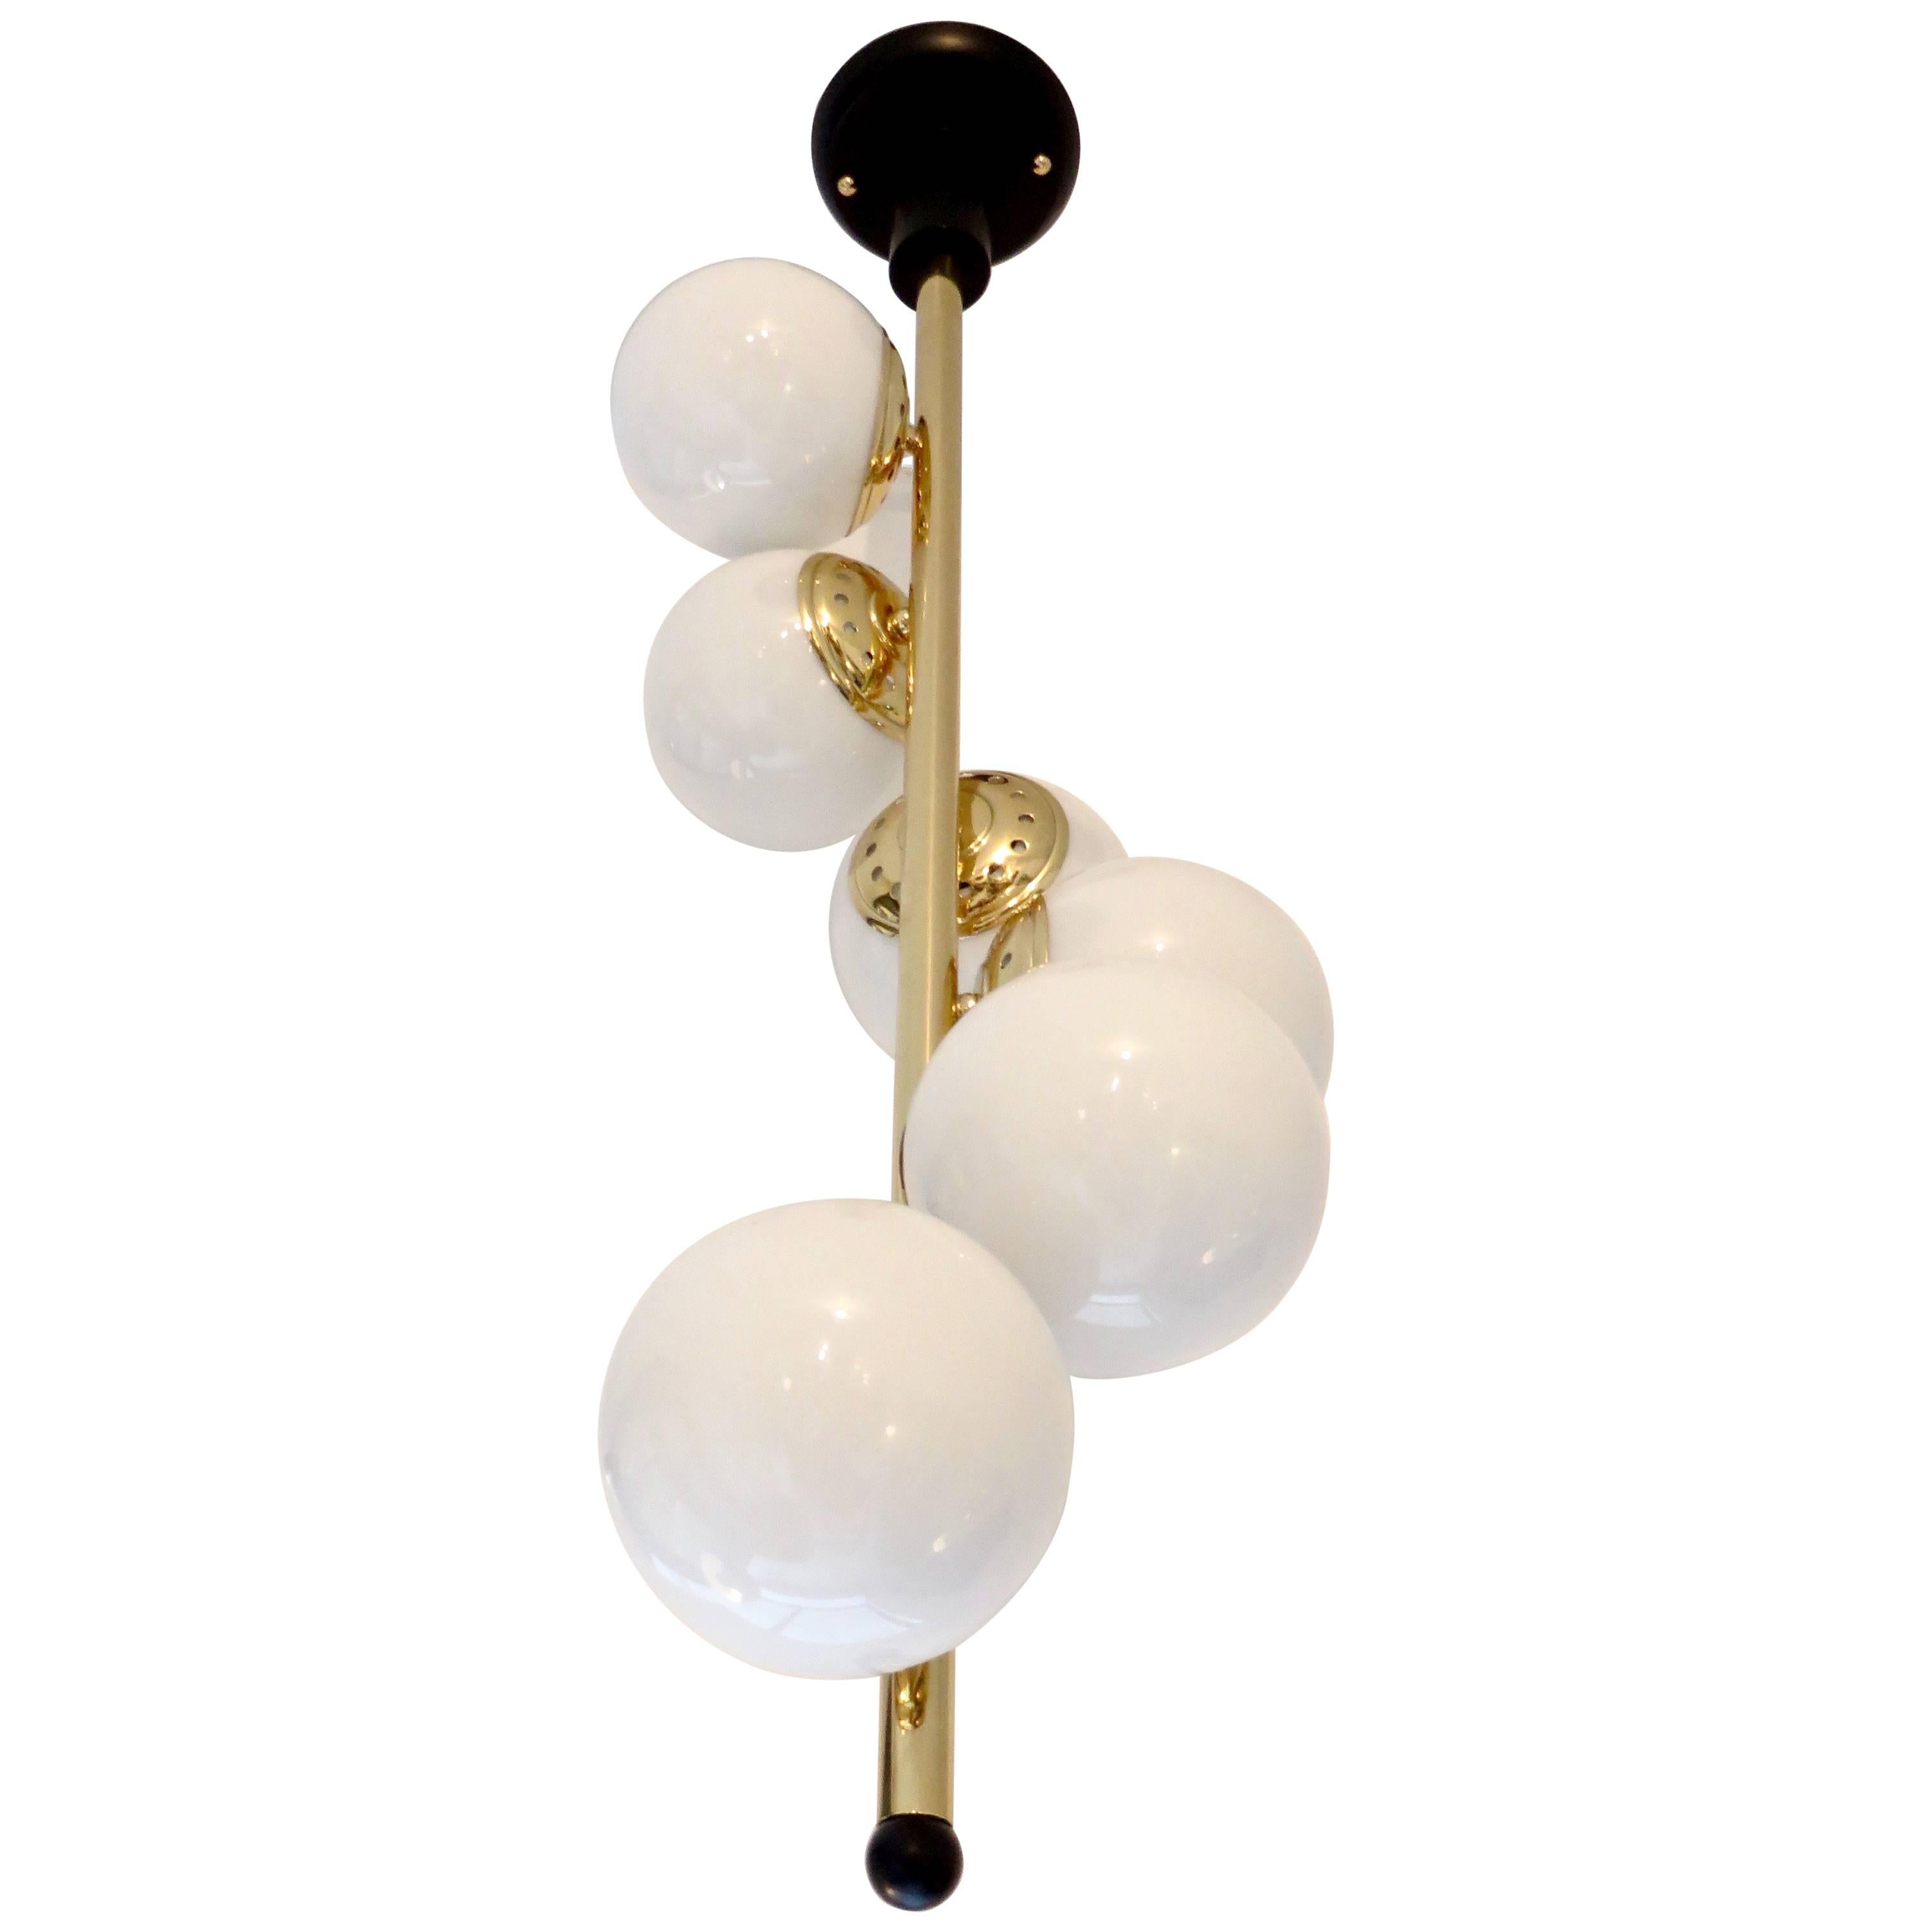 Italian Six-Light Brass and Glass Chandelier with Opaque White Globes, Stilnovo